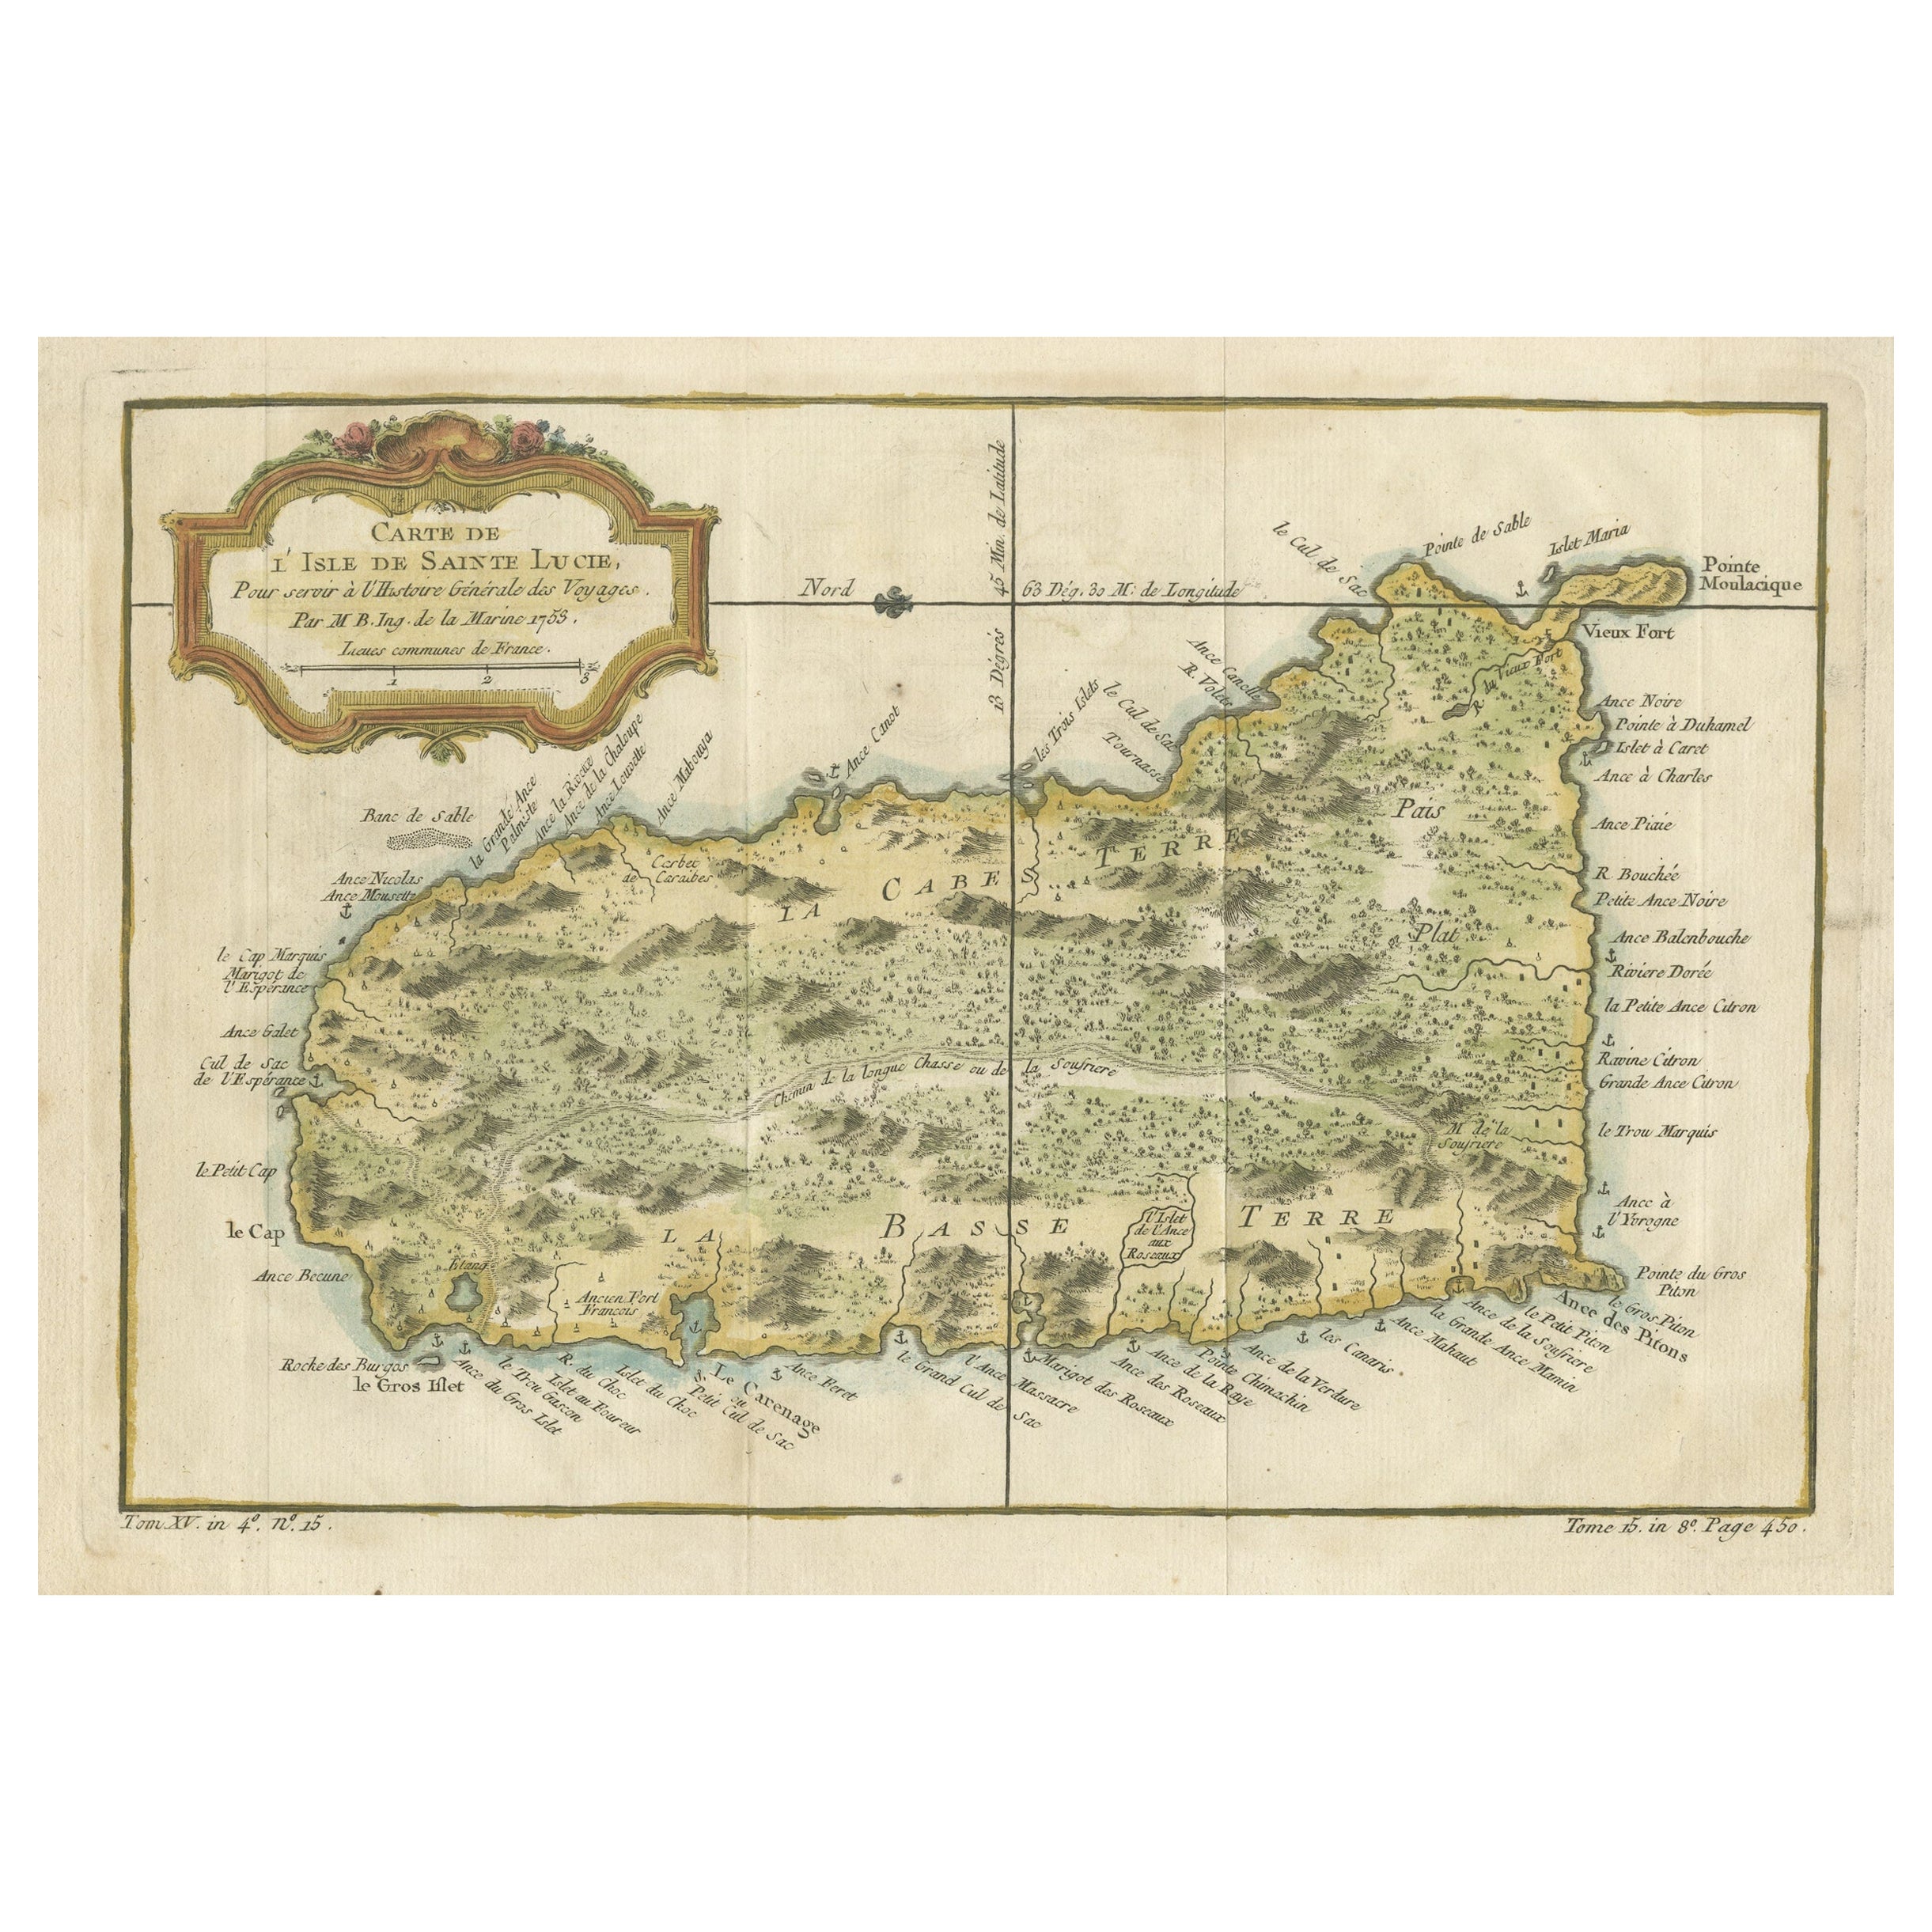 Engraved Map by Bellin of Saint Lucia or Sainte Lucie in the West Indies, 1764